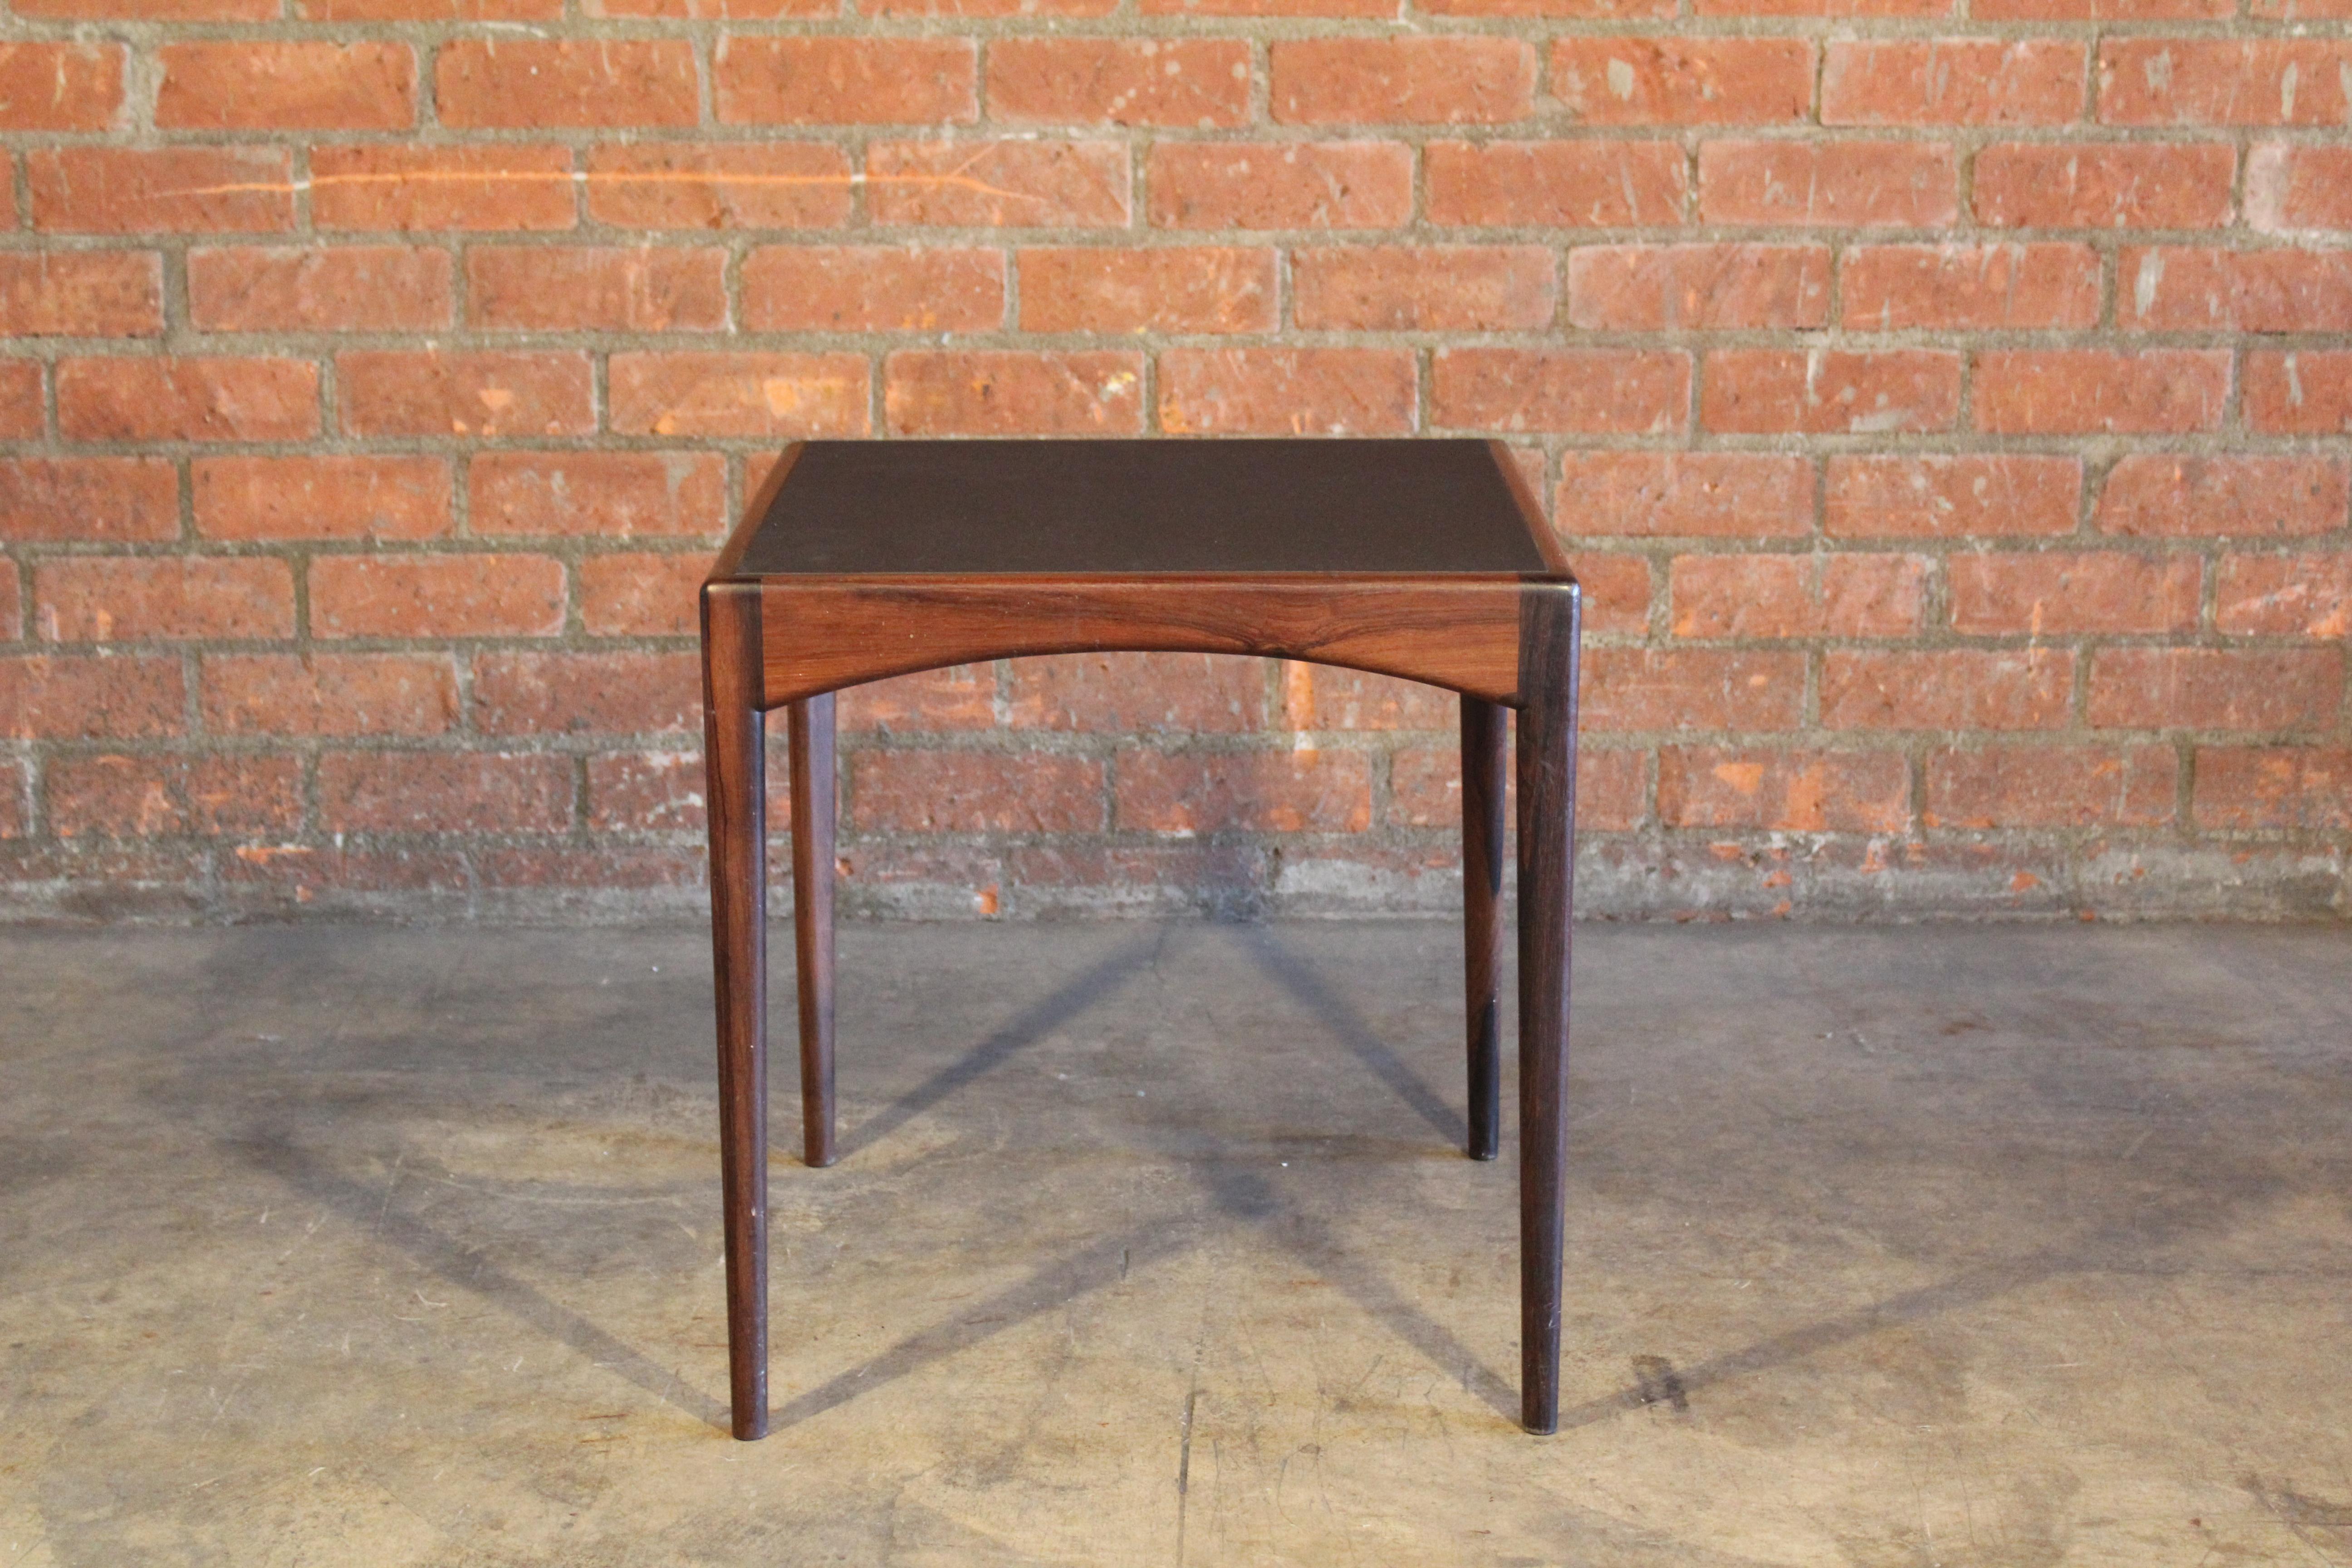 A beautiful 1950s table made of solid Brazilian rosewood with a leather insert top. Made in Denmark. In good condition.